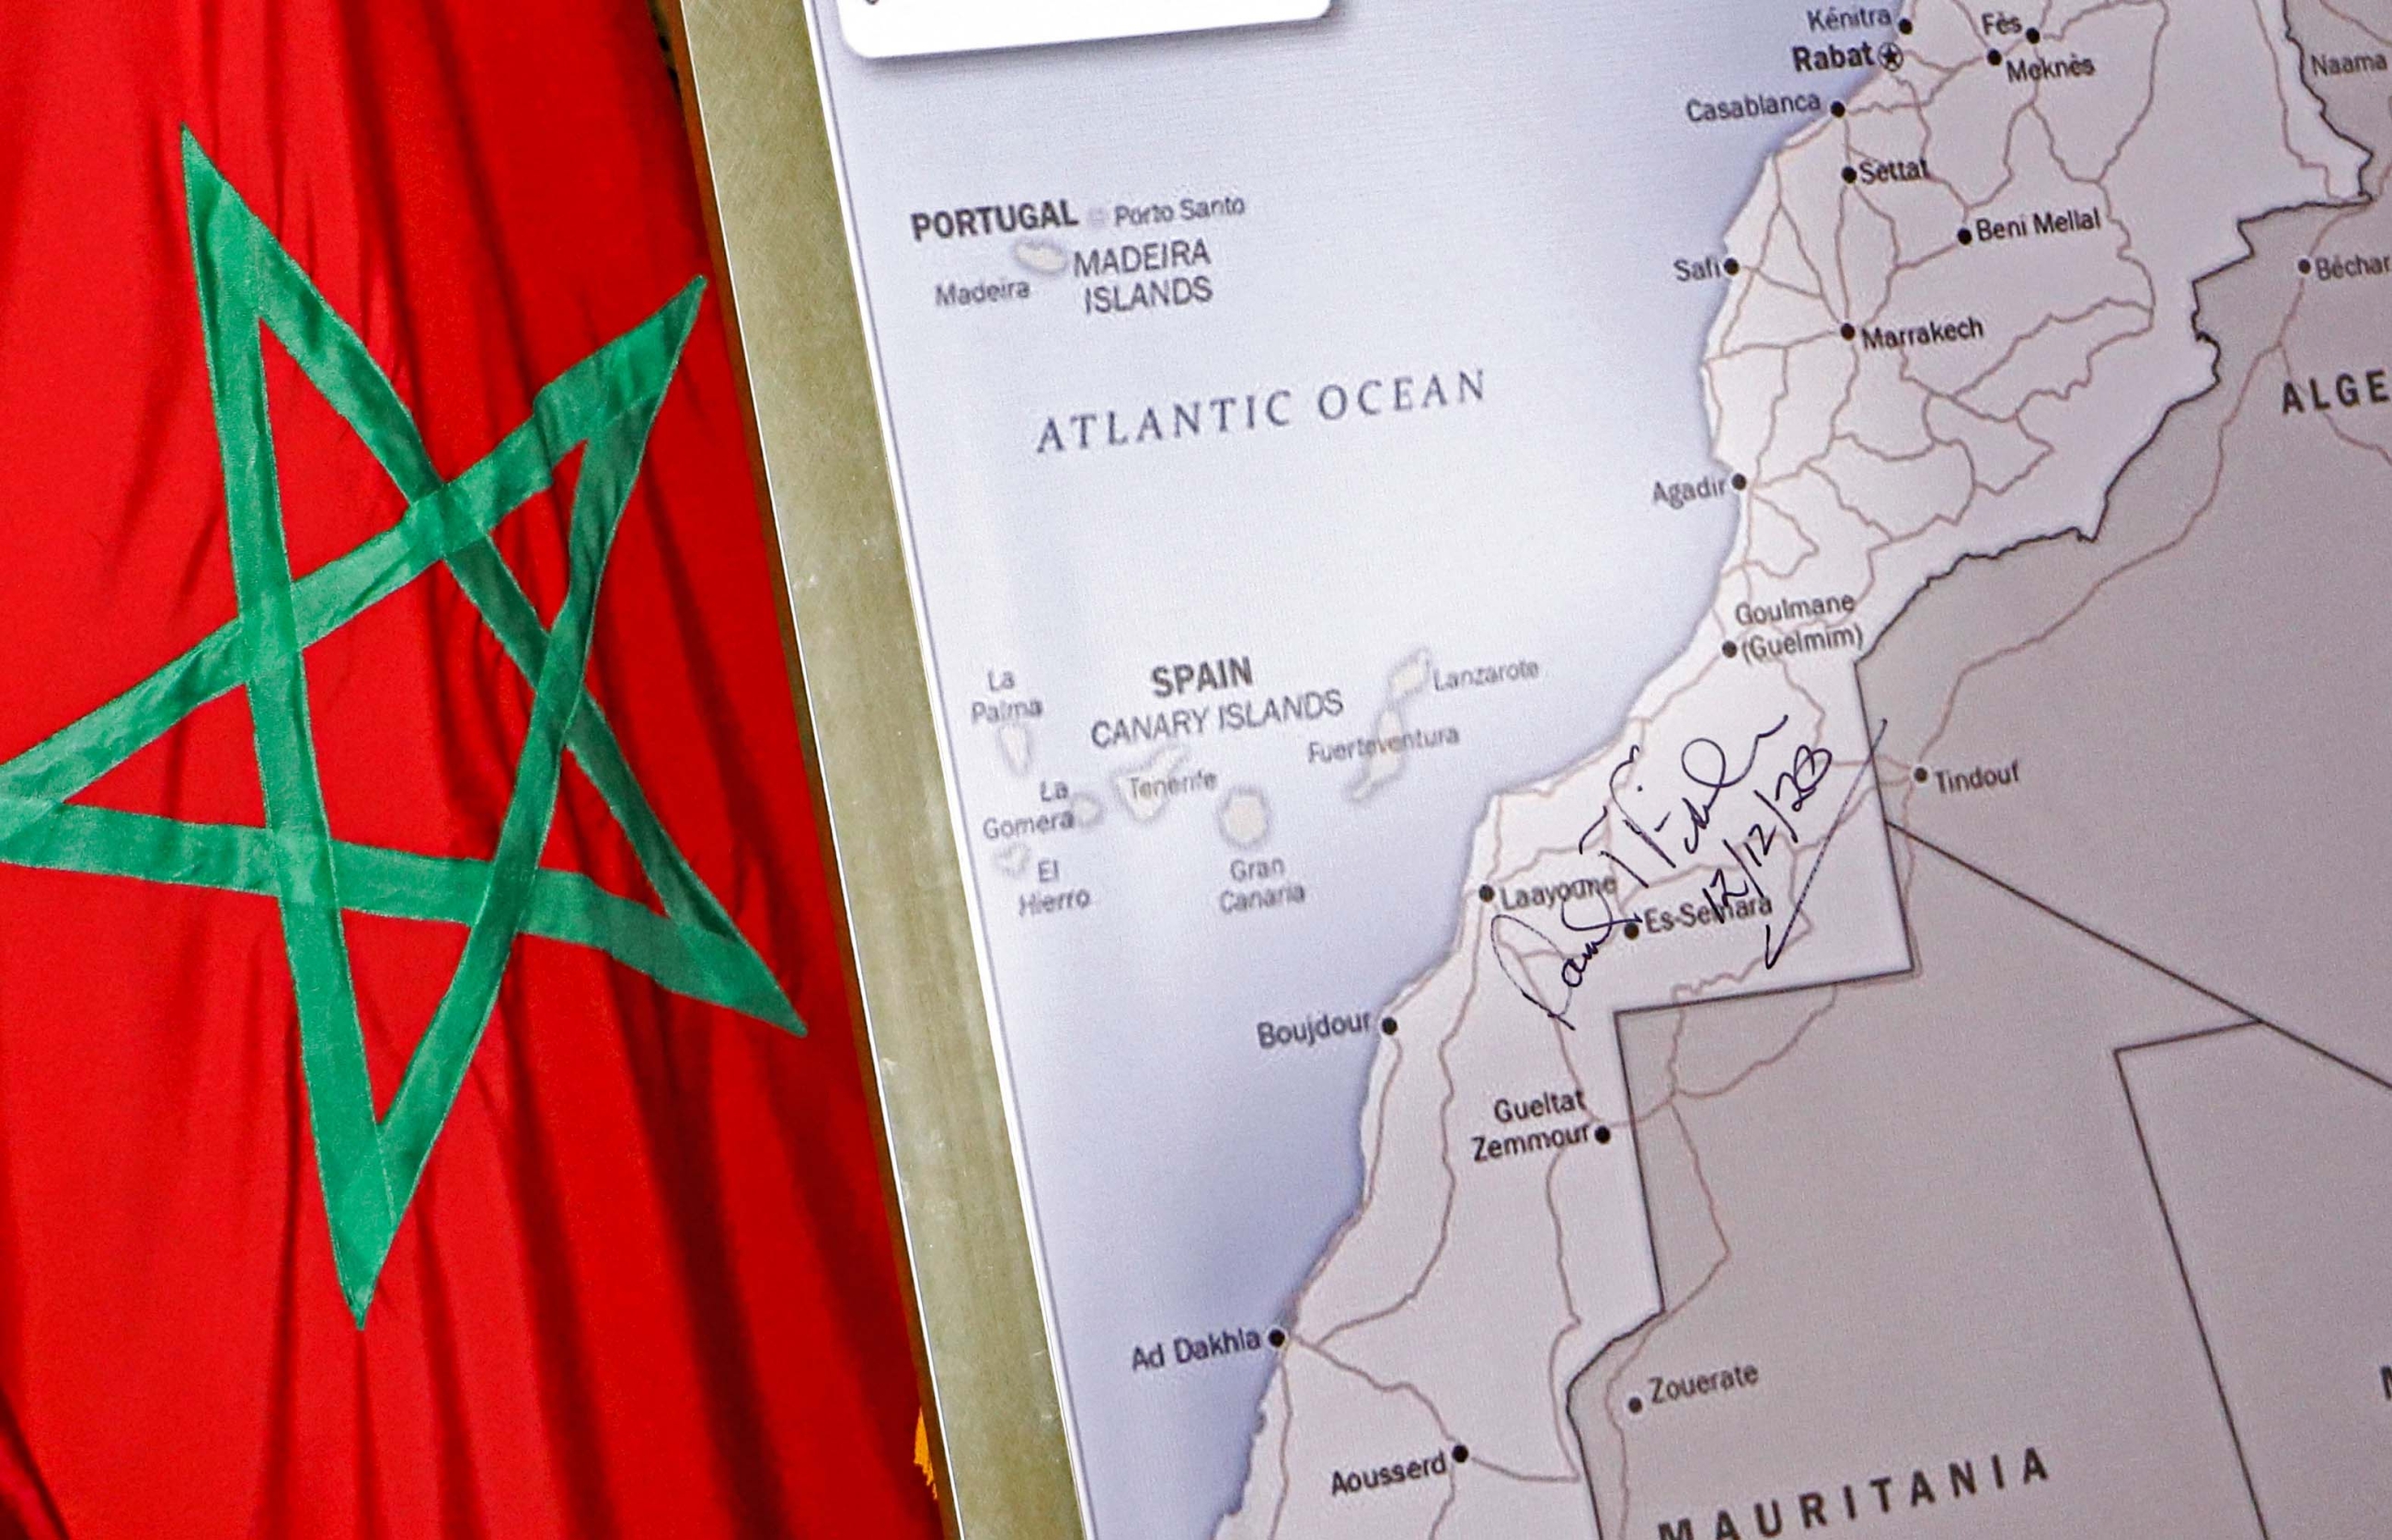 The Moroccan flag is shown next to a US State Department-authorised map of Morocco recognising the territory of the Western Sahara as a part of the North African kingdom.